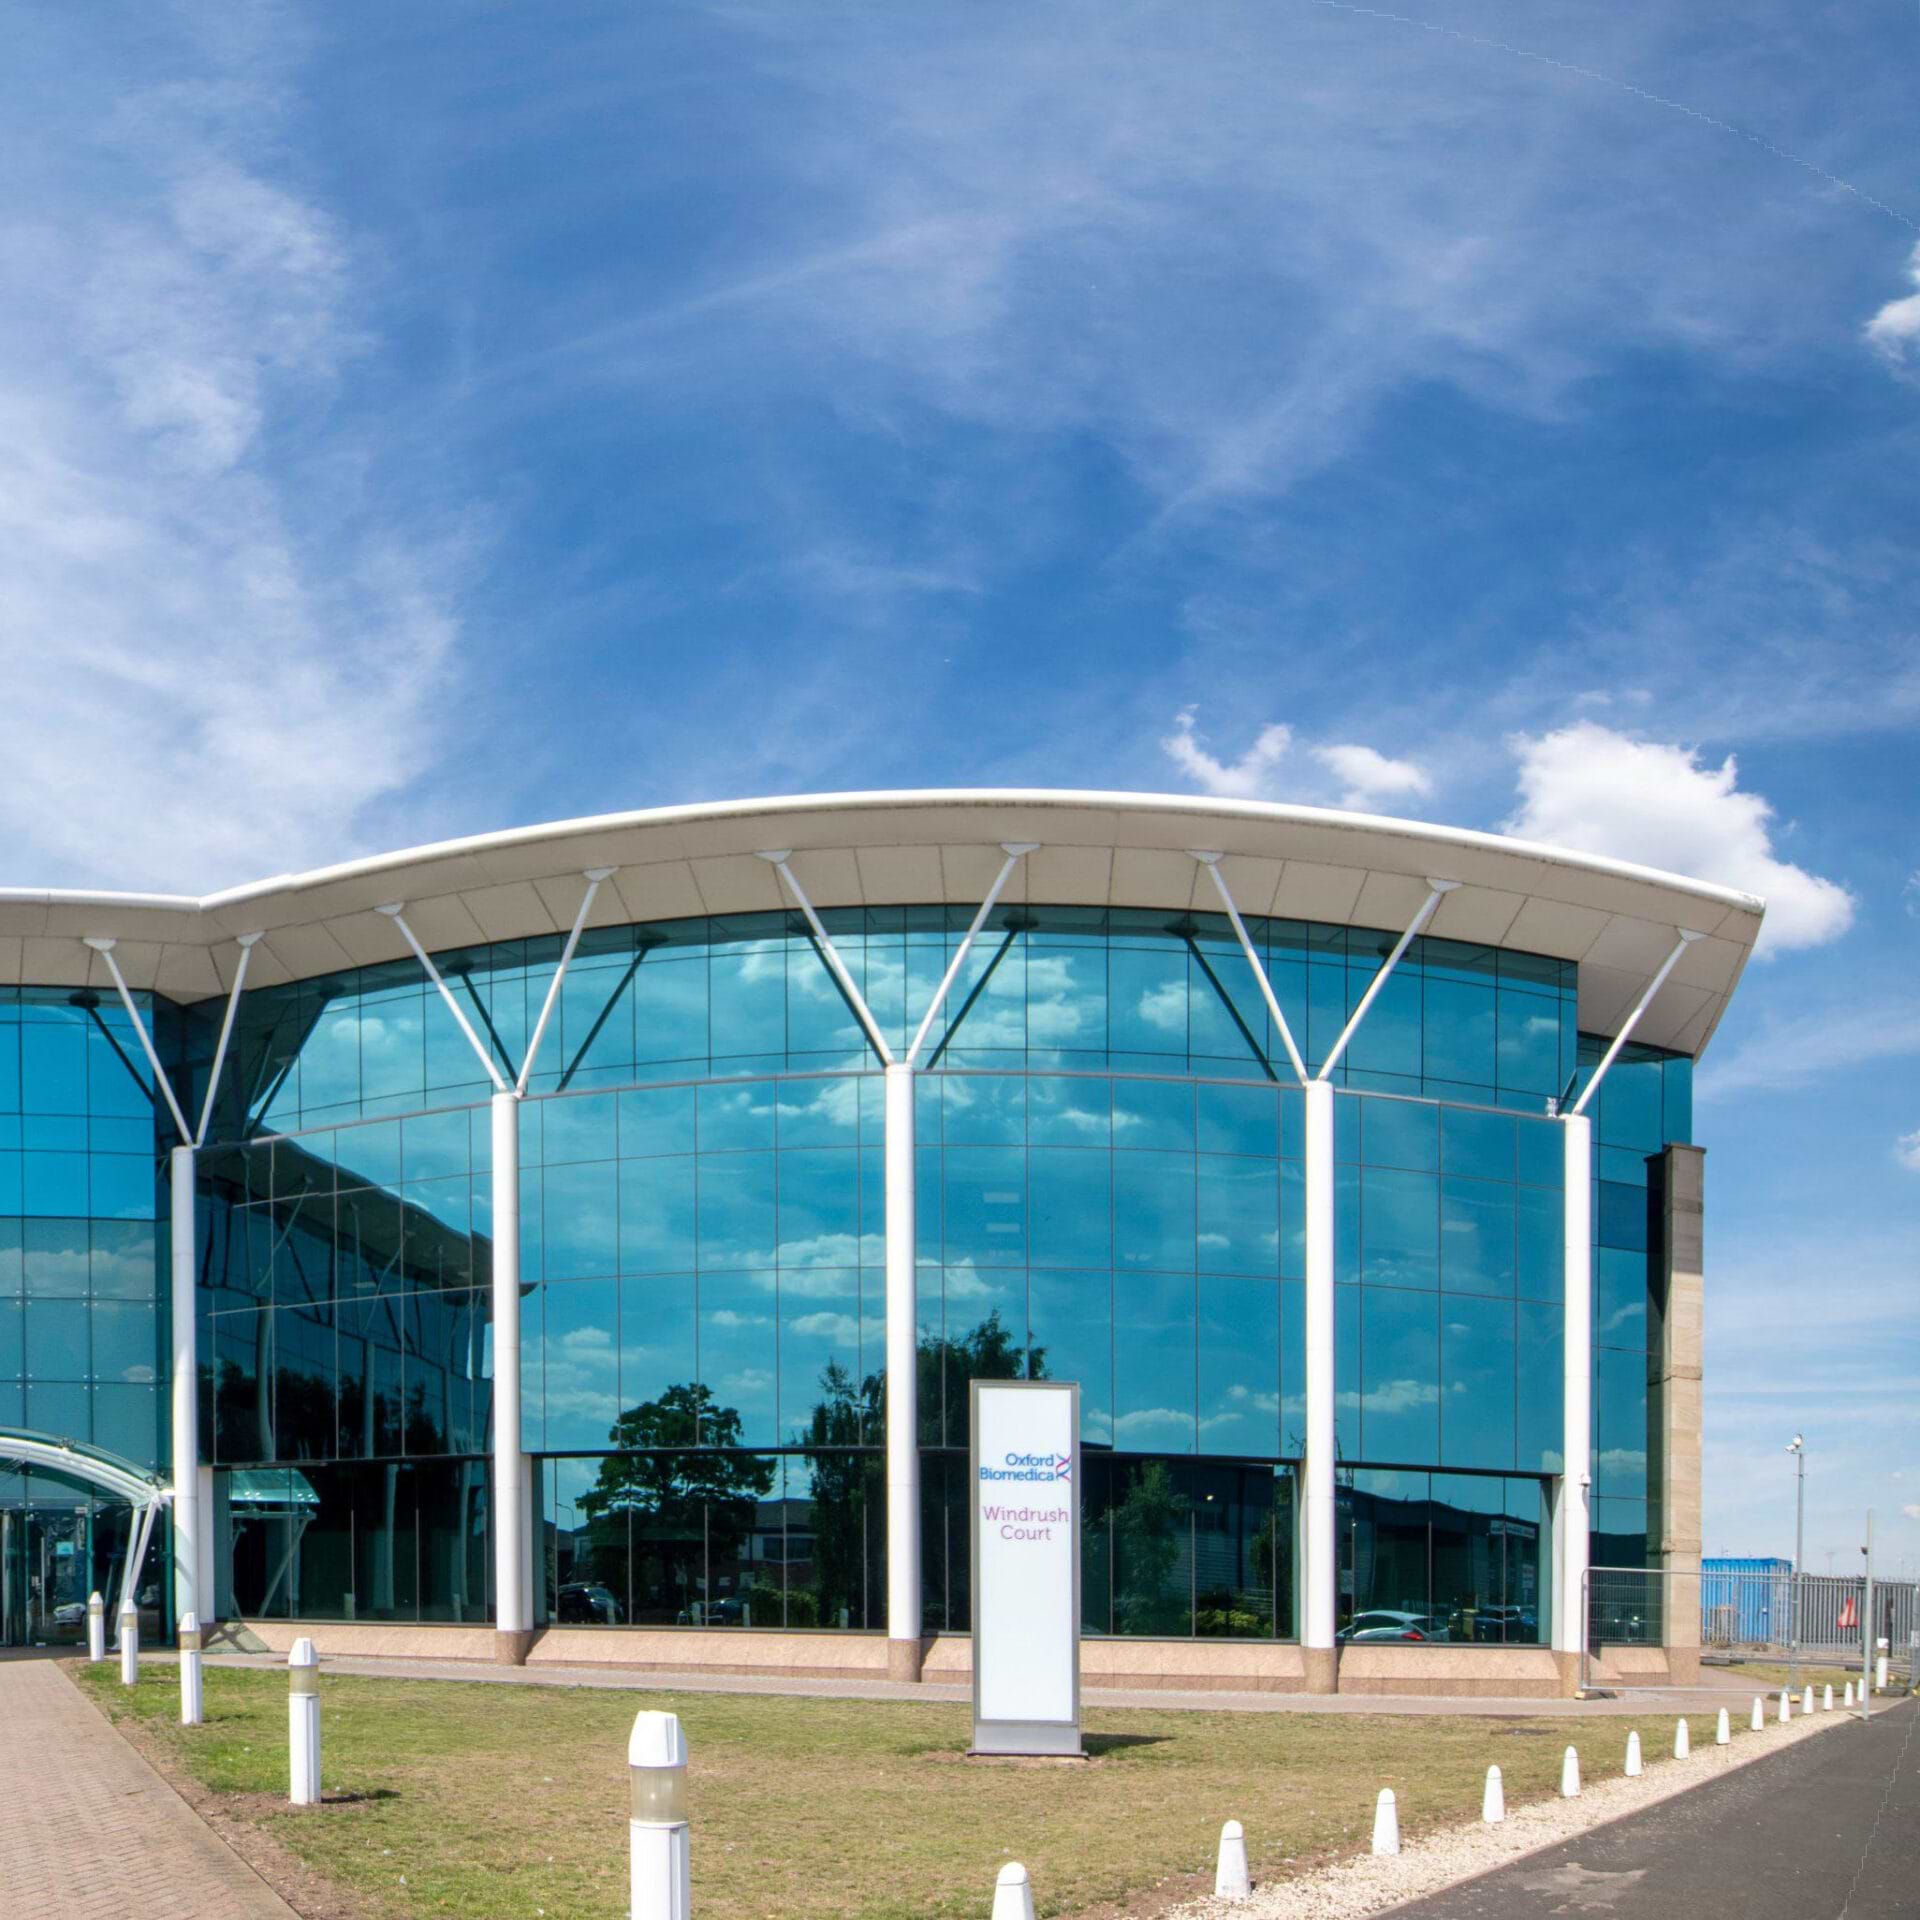 The Oxford Biomedica HQ encompasses over 84,000 sq ft of office, lab and support space. A key part of the Oxford life science ecosystem, the building was purchased by Kadans Science Partner in November 2022. The building is occupied in its entirety to Oxford Biomedica, a world leading viral vector and cell and gene therapy specialist.